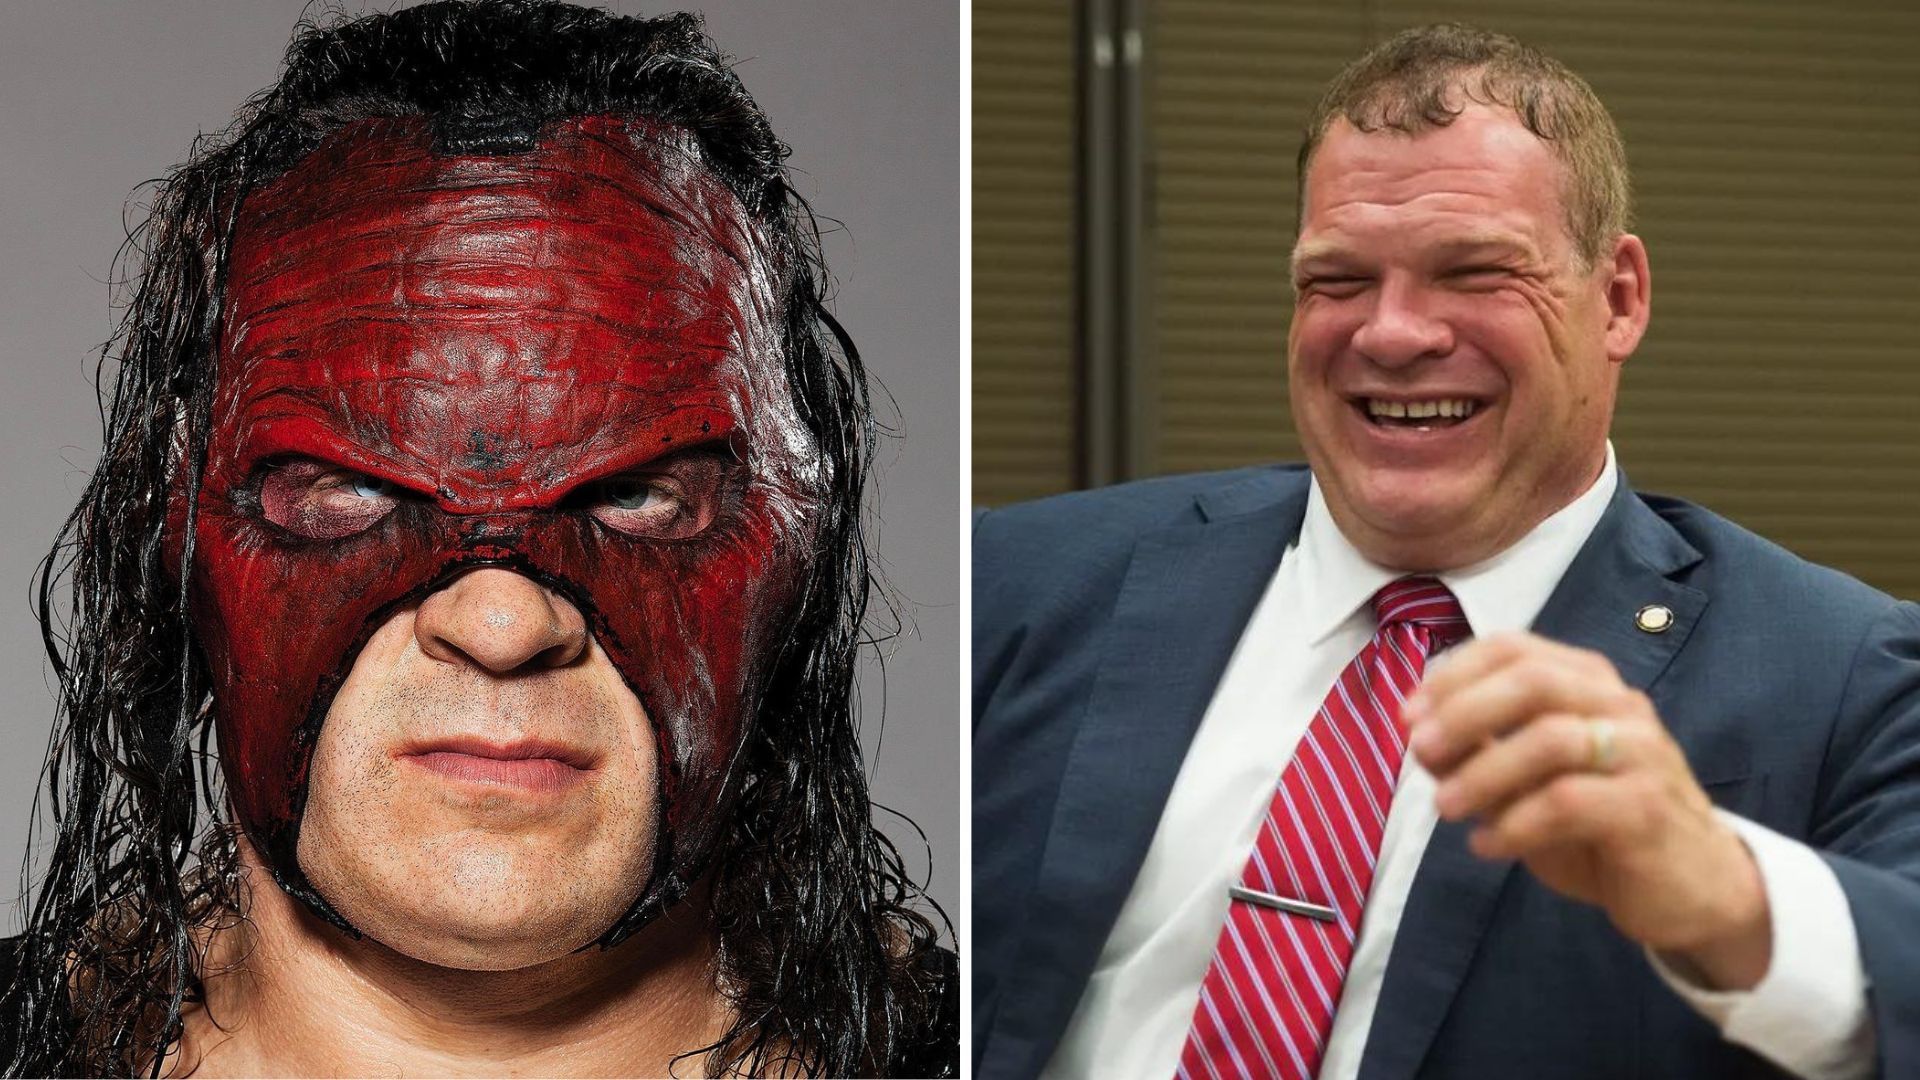 Kane was inducted into the WWE Hall of Fame in 2021.